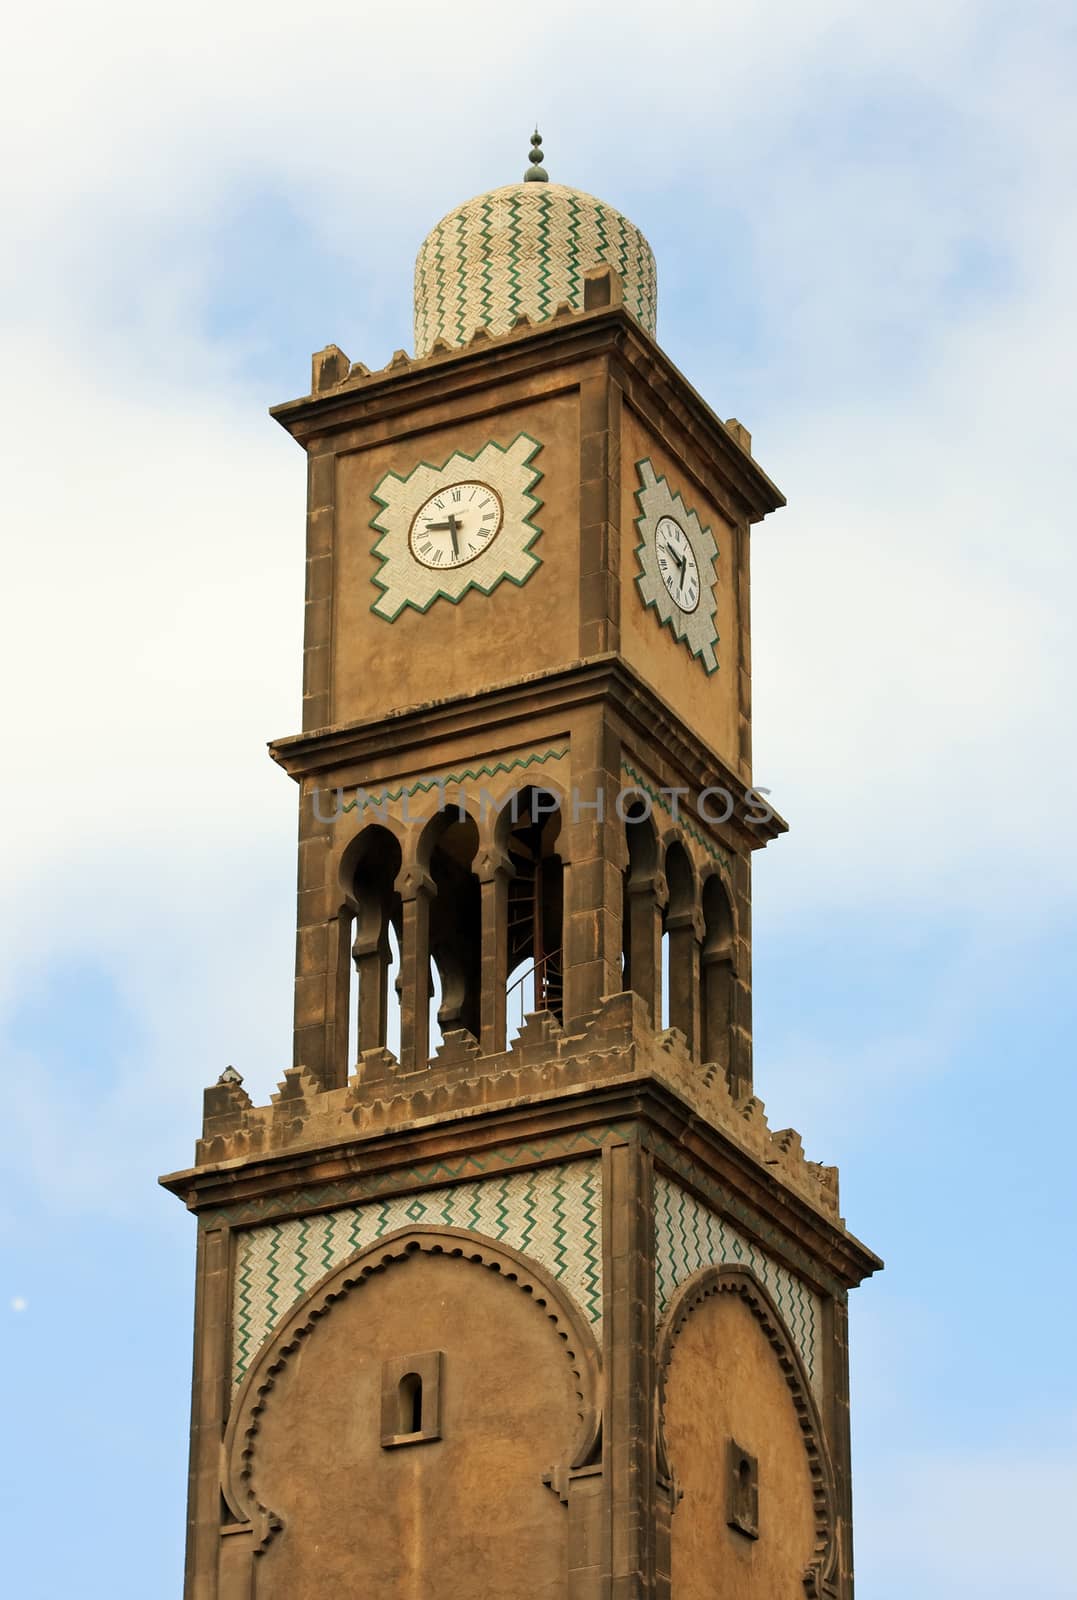 The clock tower is situated at the gateway to the Old Medina in Casablanca, Morocco.